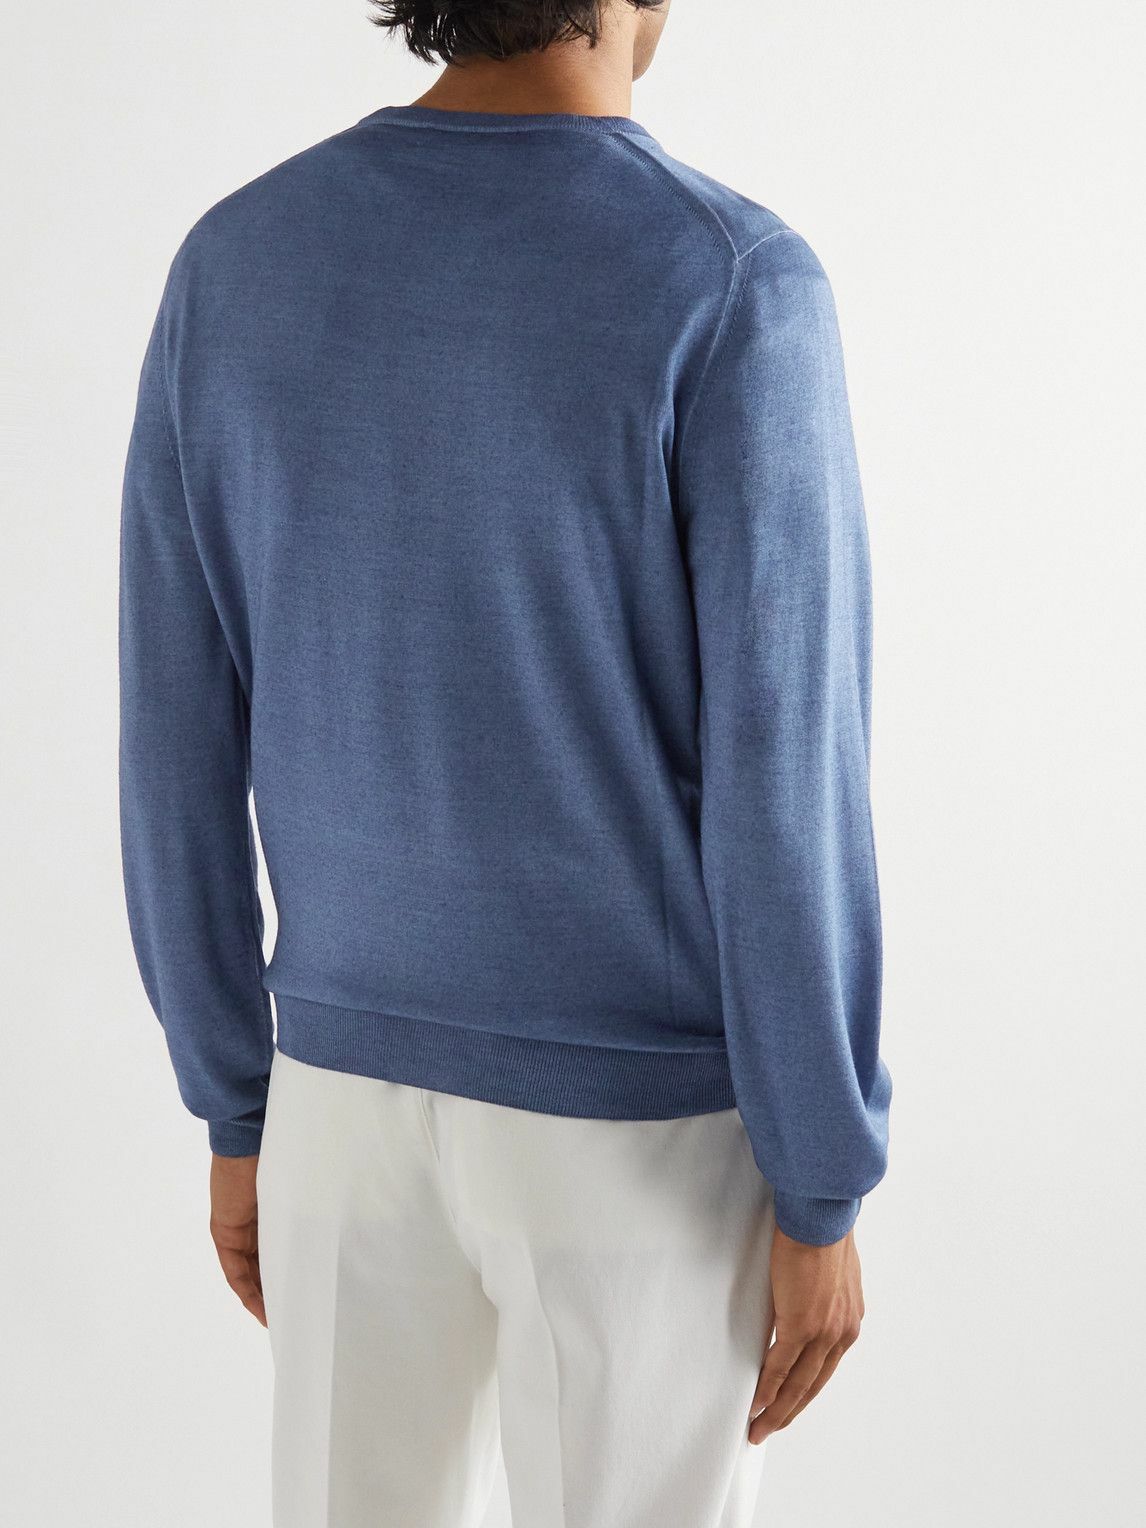 Canali - Slim-Fit Wool and Silk-Blend Sweater - Blue Canali